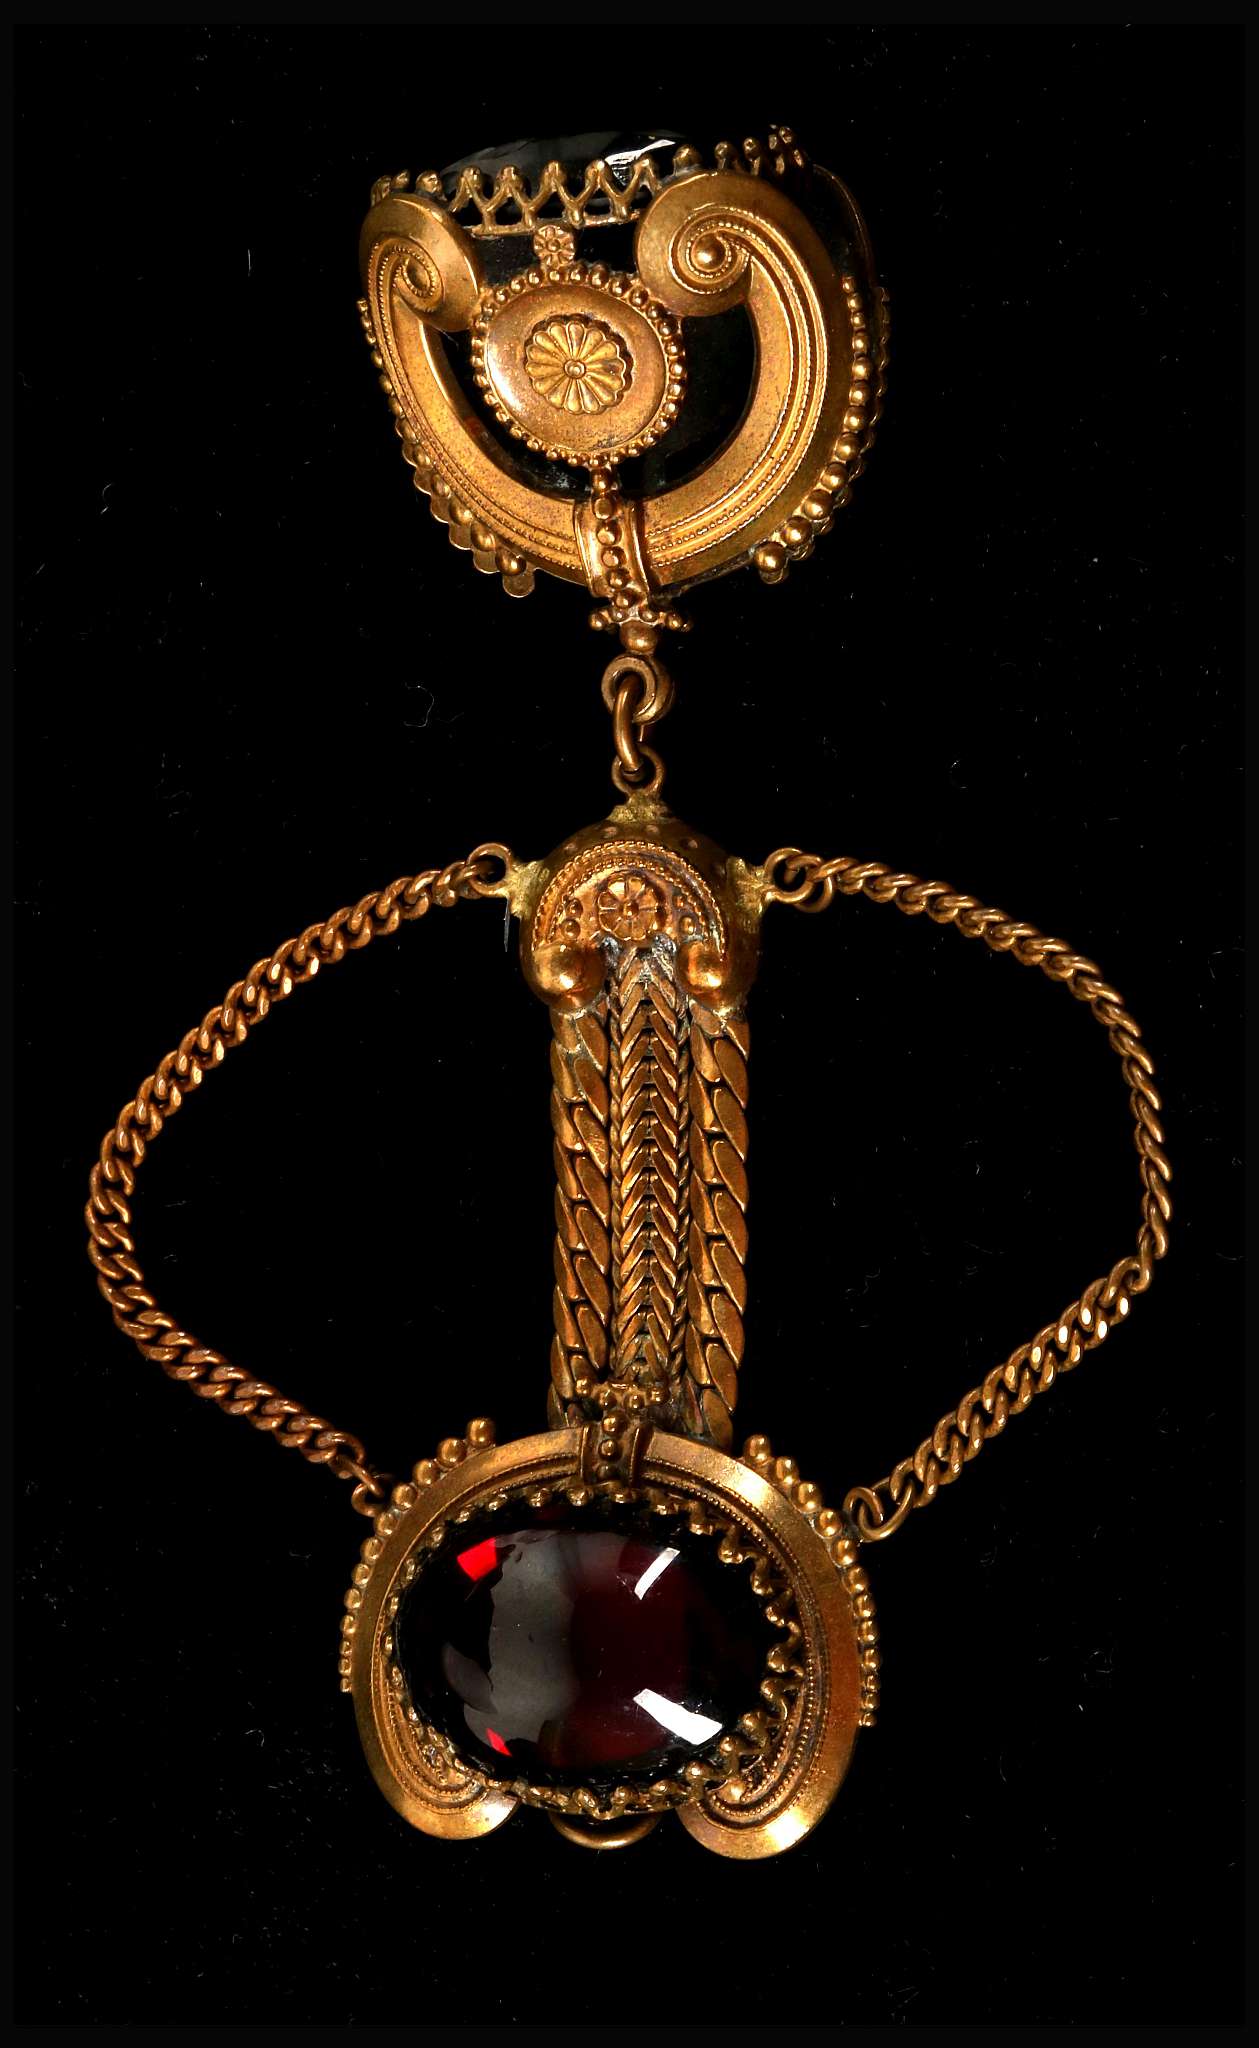 A c.1940's Karm pendant brooch, in the form of a fob seal in gilt metal and set with garnet coloured